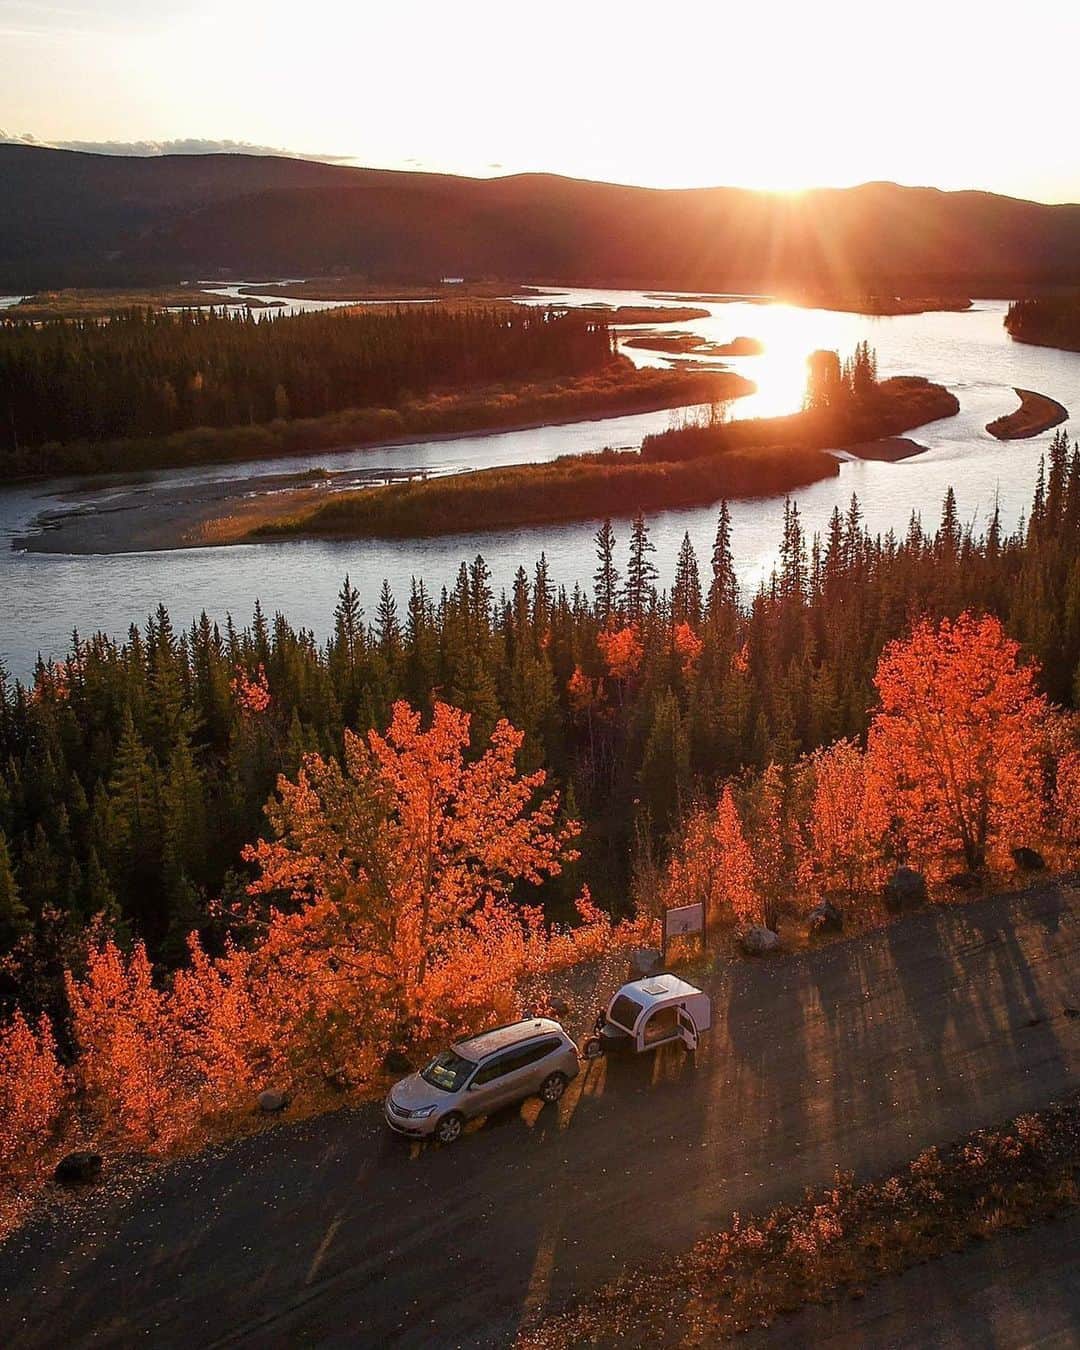 Explore Canadaさんのインスタグラム写真 - (Explore CanadaInstagram)「Today's #CanadaSpotlight is on @travelyukon!⁠⠀ ⁠⠀ We're sharing the love for all things Yukon today. Which picture is your favourite? ⁠⠀ ⁠⠀ Home to Canada's five highest mountains, a multitude of meandering rivers and alpine-fed lakes, this Canadian territory is the perfect destination for explorers and adventurers alike. Here are a just a few of the many things to love about the Yukon:⁠⠀ ⁠⠀ 💛 In the summer, the Midnight Sun shines all day and night in some areas!⁠⠀ 🧡Around 80% of the Yukon is wildneress, making it the perfect escape to reconnect with nature.⁠⠀ 💙There are 14 unique First Nations in the Yukon, plus a huge array of historical sites.⁠⠀ ❤️The Dempster Highway is the only Canadian road to the Arctic Circle - imagine that for a roadtrip!⁠⠀ ⁠⠀ While the Yukon borders remain closed for now, you can still head on over to @travelyukon for some more Yukon inspiration and updates. ⁠⠀ ⁠⠀ ⁠⠀ #ExploreCanadaFromHome #ForGlowingHearts ⁠⠀ ⁠⠀ 📷: ⁠⠀ 1. @johnrosano5⁠⠀ 2. @tomtuffee⁠⠀ 3. @jakegrahamphoto⁠⠀ 4. @sonny.parker⁠⠀ 5. @voyagesofmine⁠⠀ 6. @erynmacgillivray⁠⠀ 7. @jesseschpakowski⁠⠀ 8. @amy_upnorth⁠⠀ 9. @wild_route_adventure⁠⠀ ⁠⠀ ⁠⠀ 📍: @travelyukon⁠⠀ ⁠⠀ #ExploreYukon」5月28日 2時06分 - explorecanada